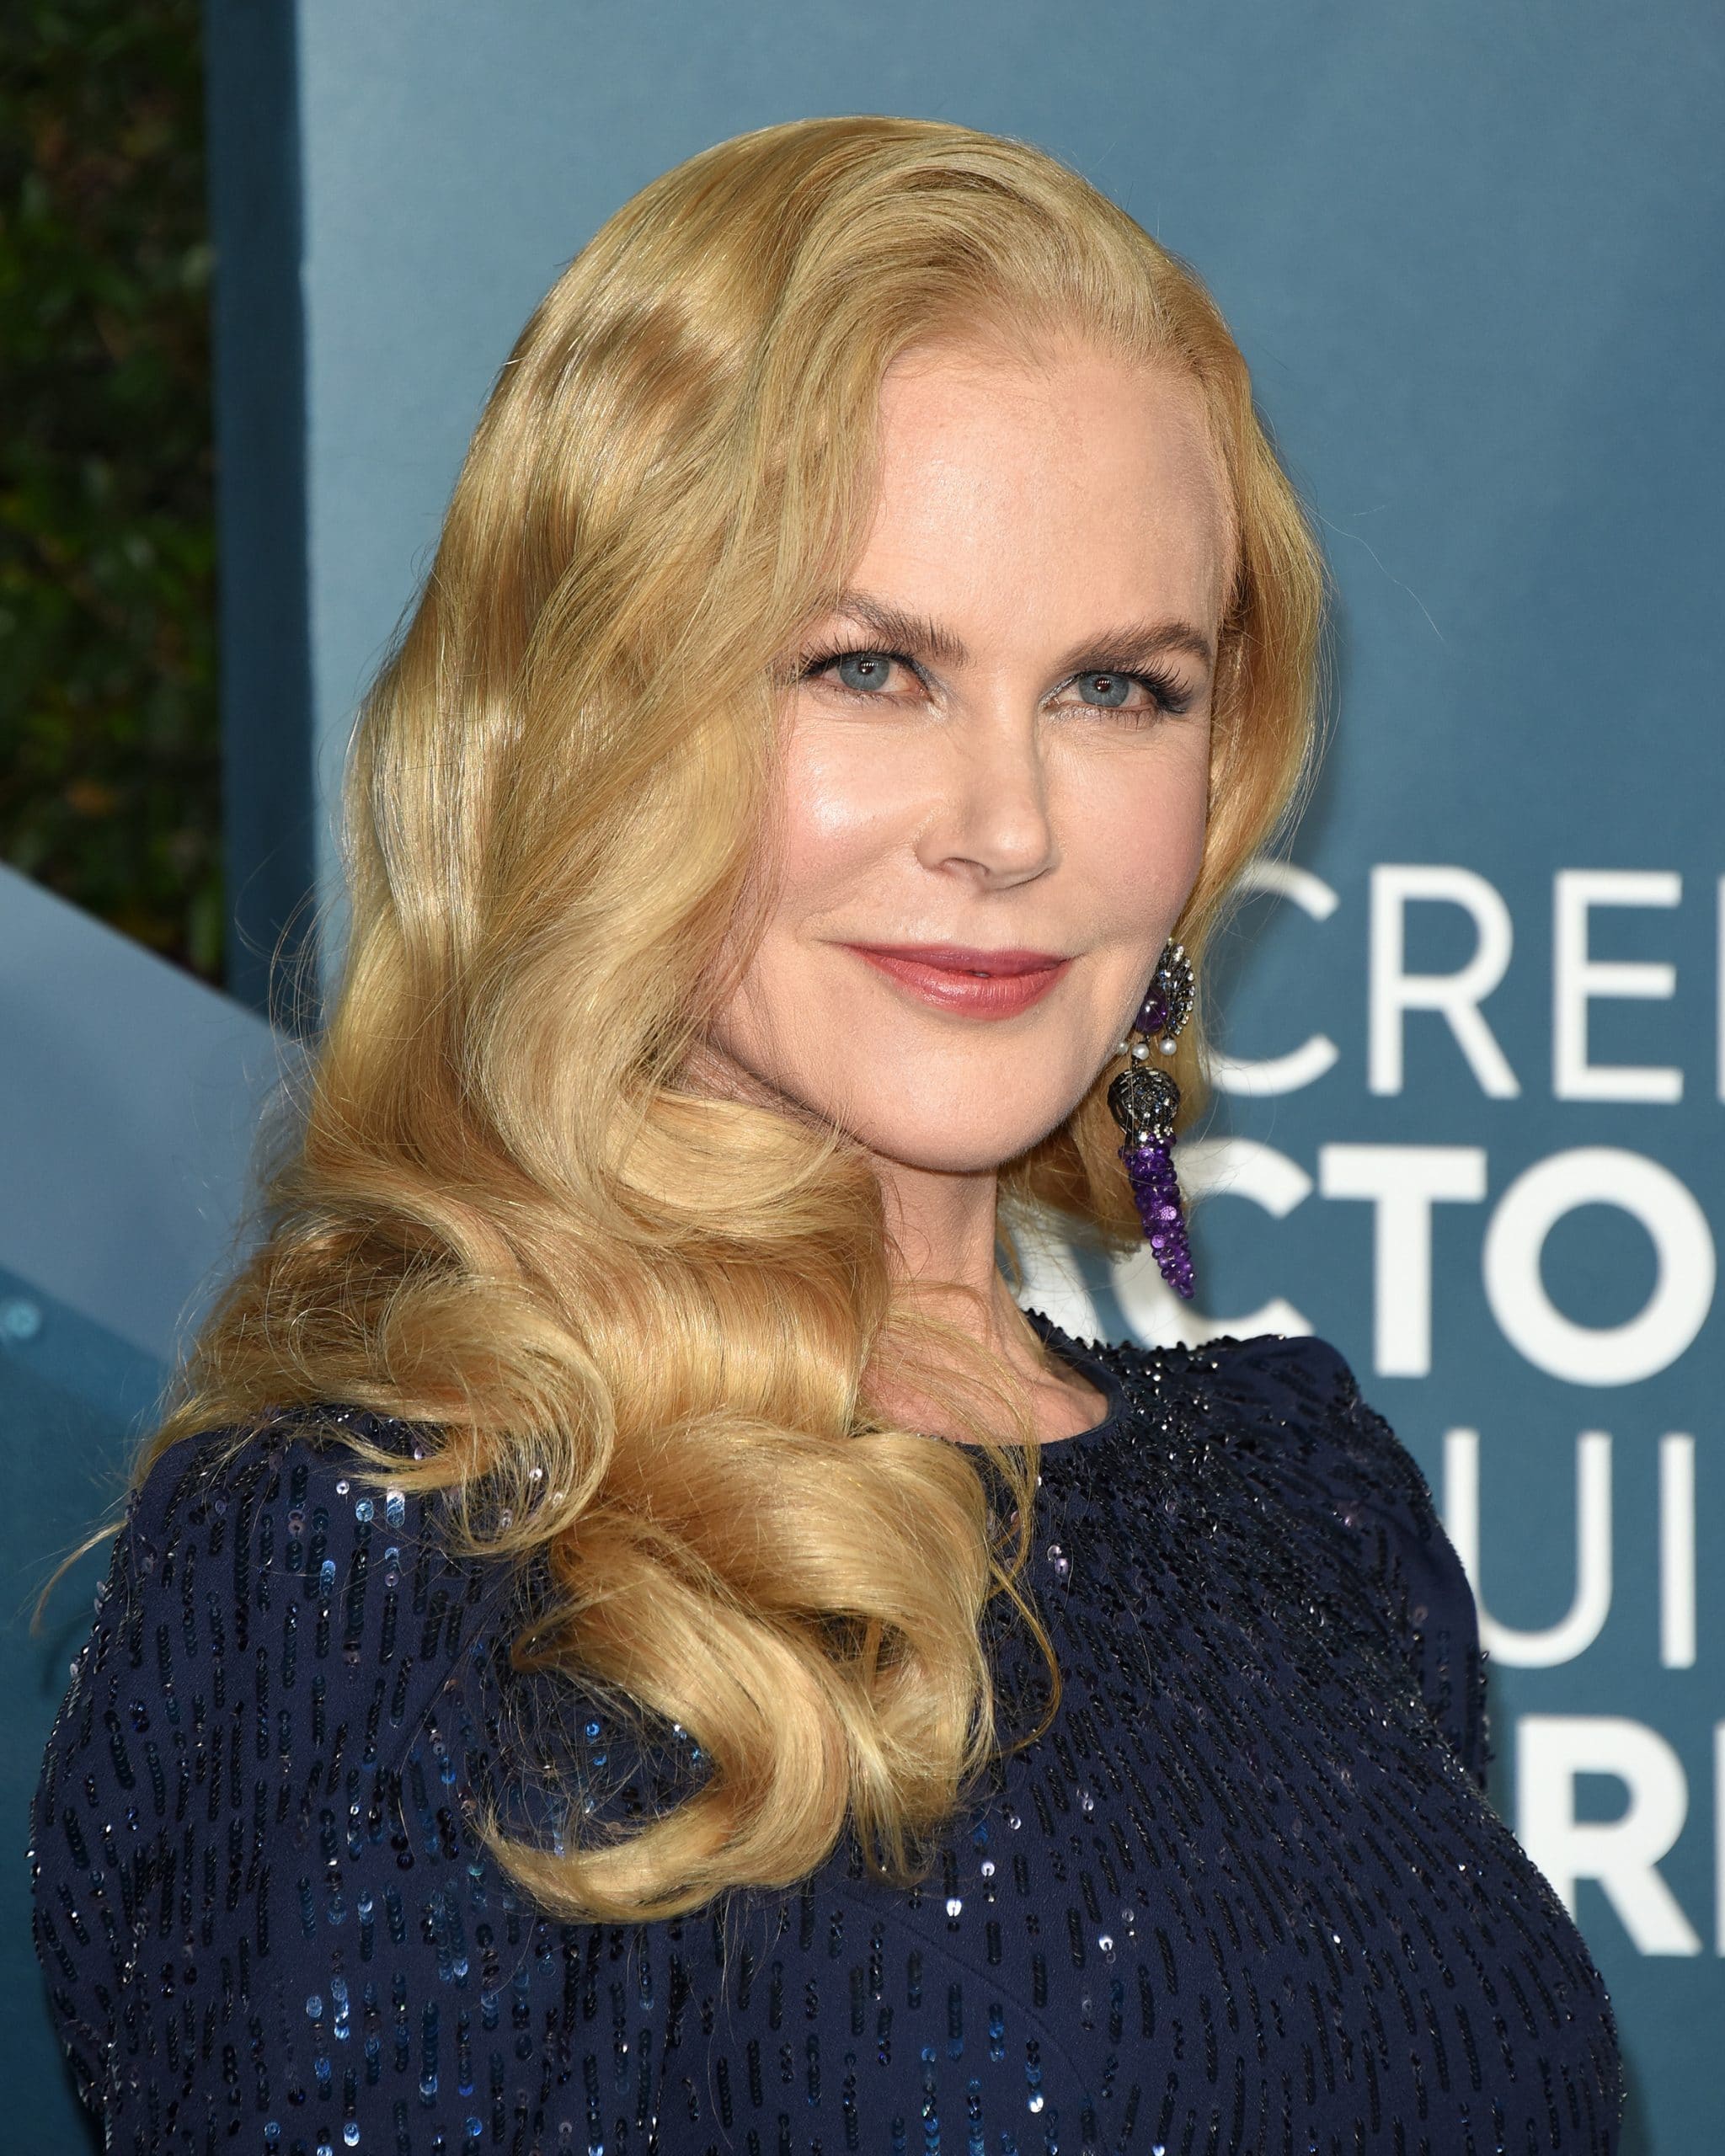 Nicole Kidman Talks What It's Like To Portray The Legendary Lucille Ball